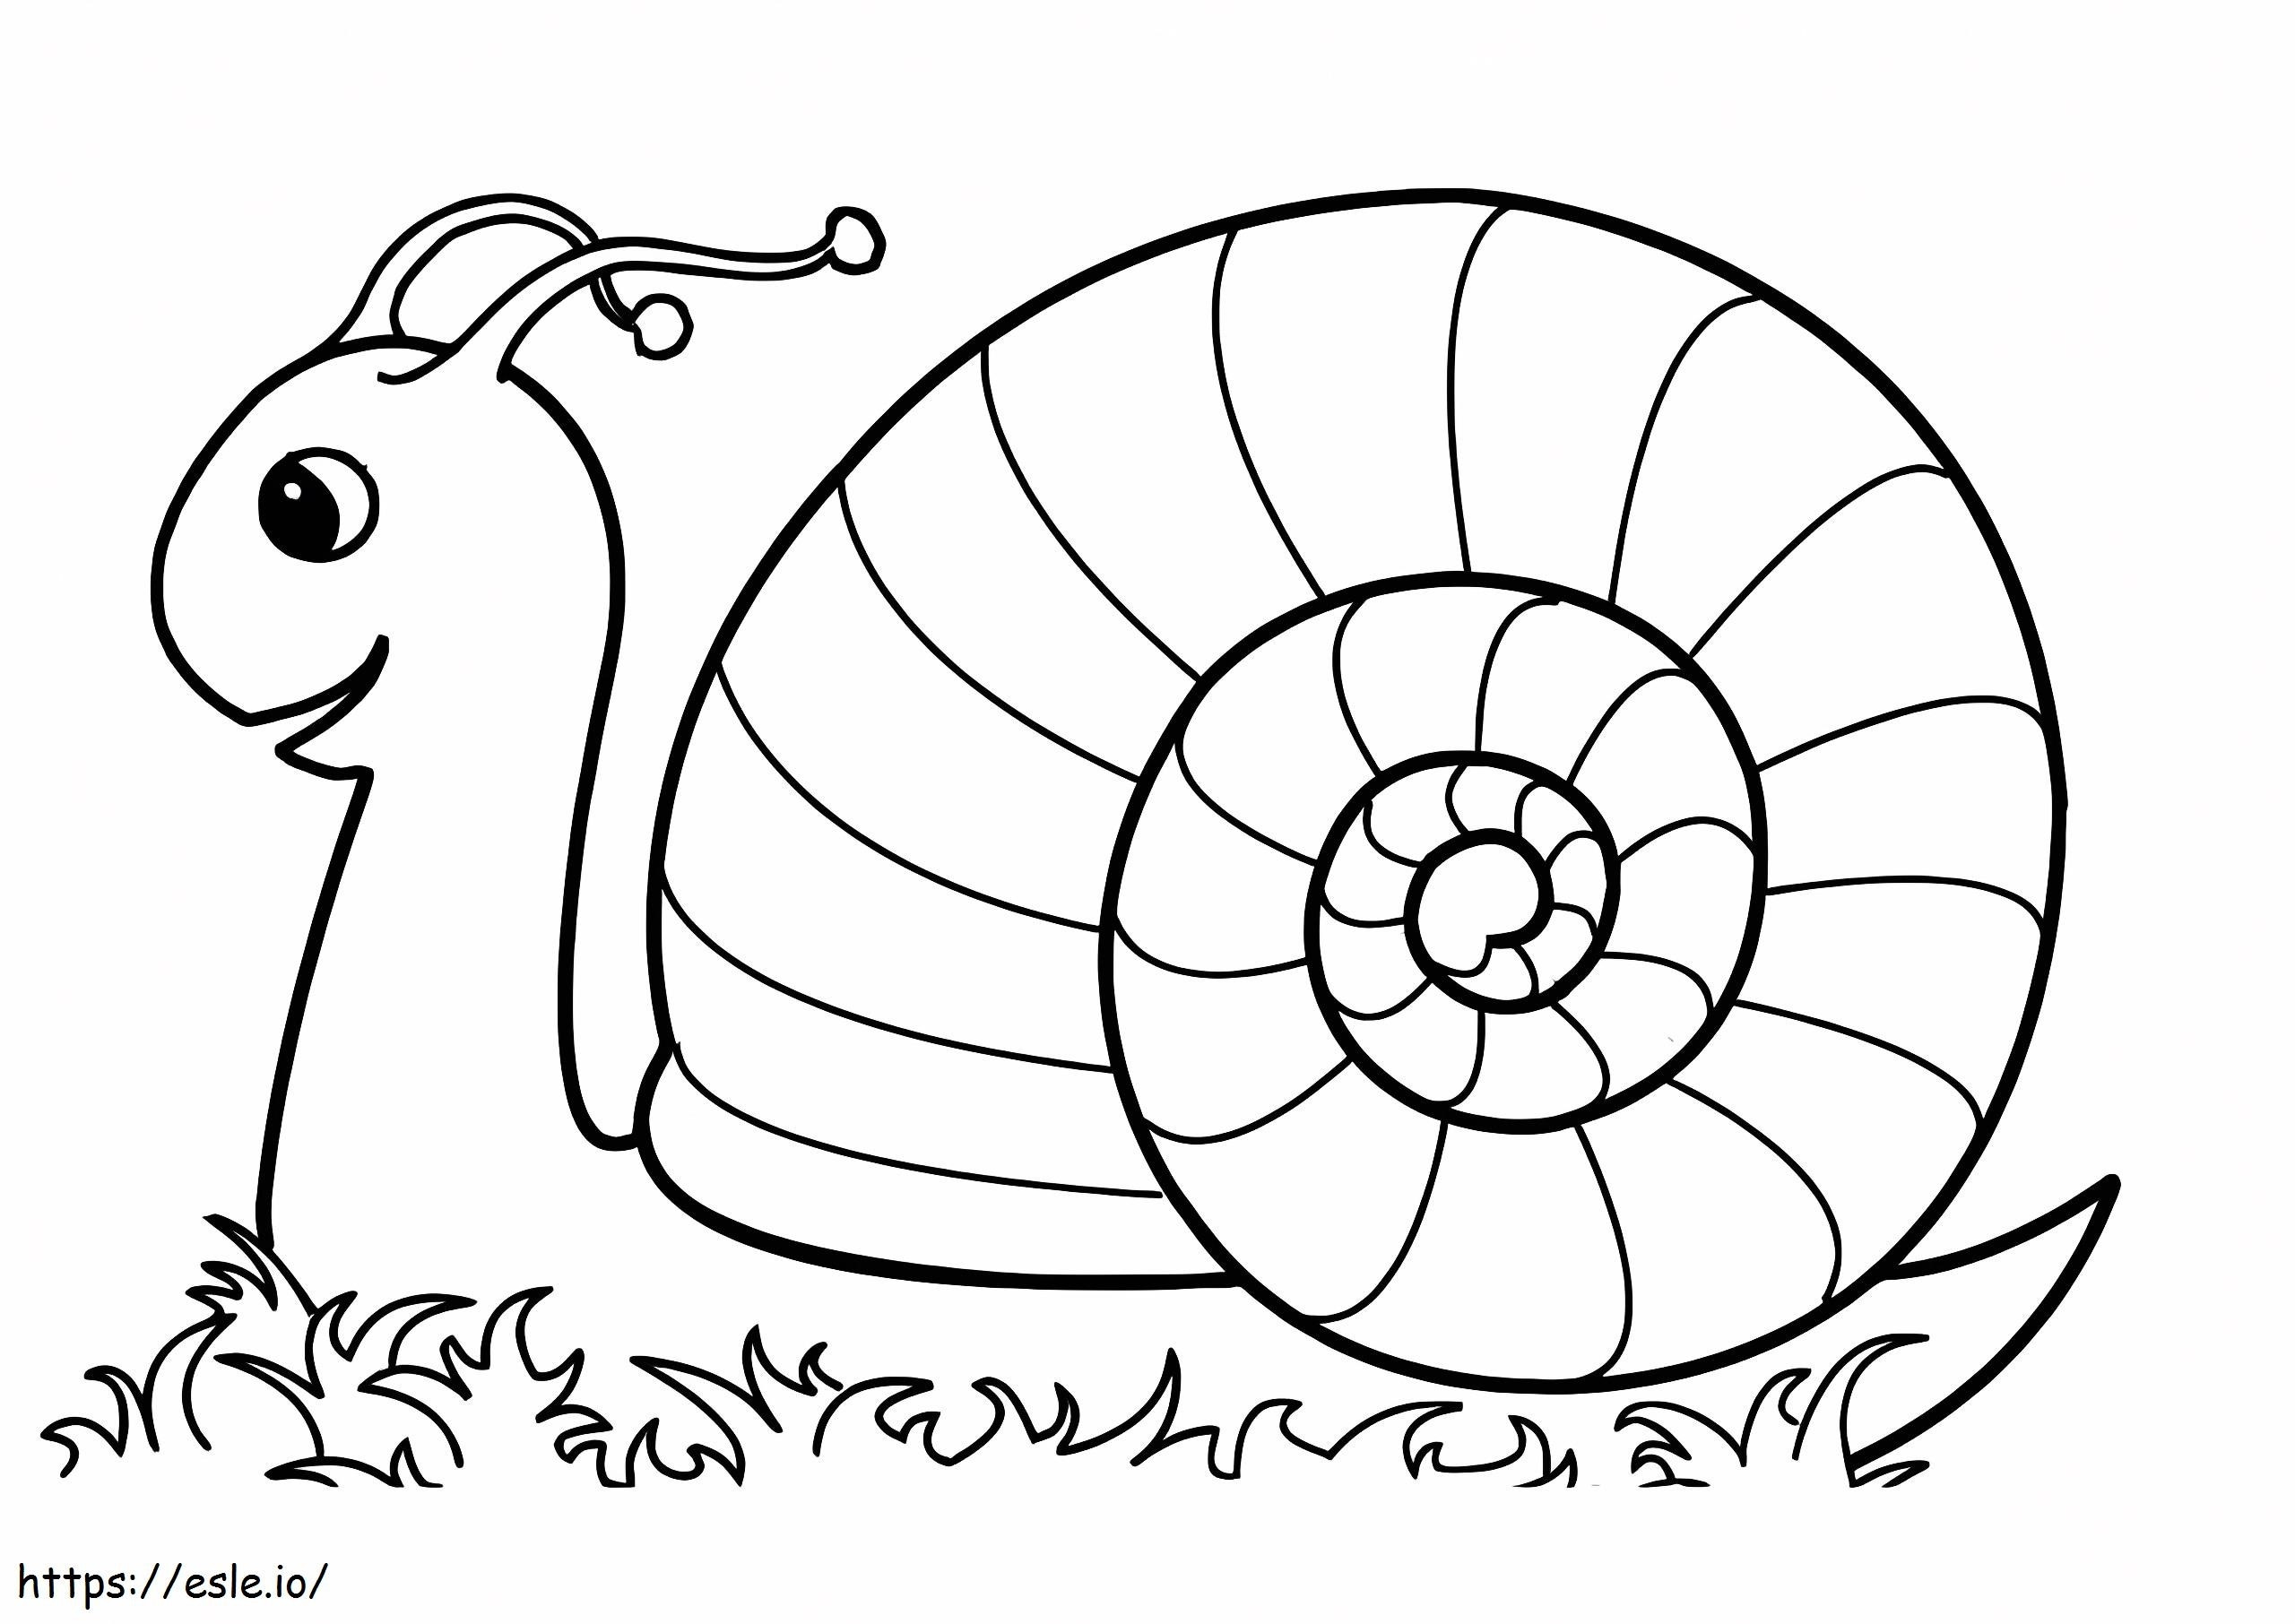 Normal Snail coloring page